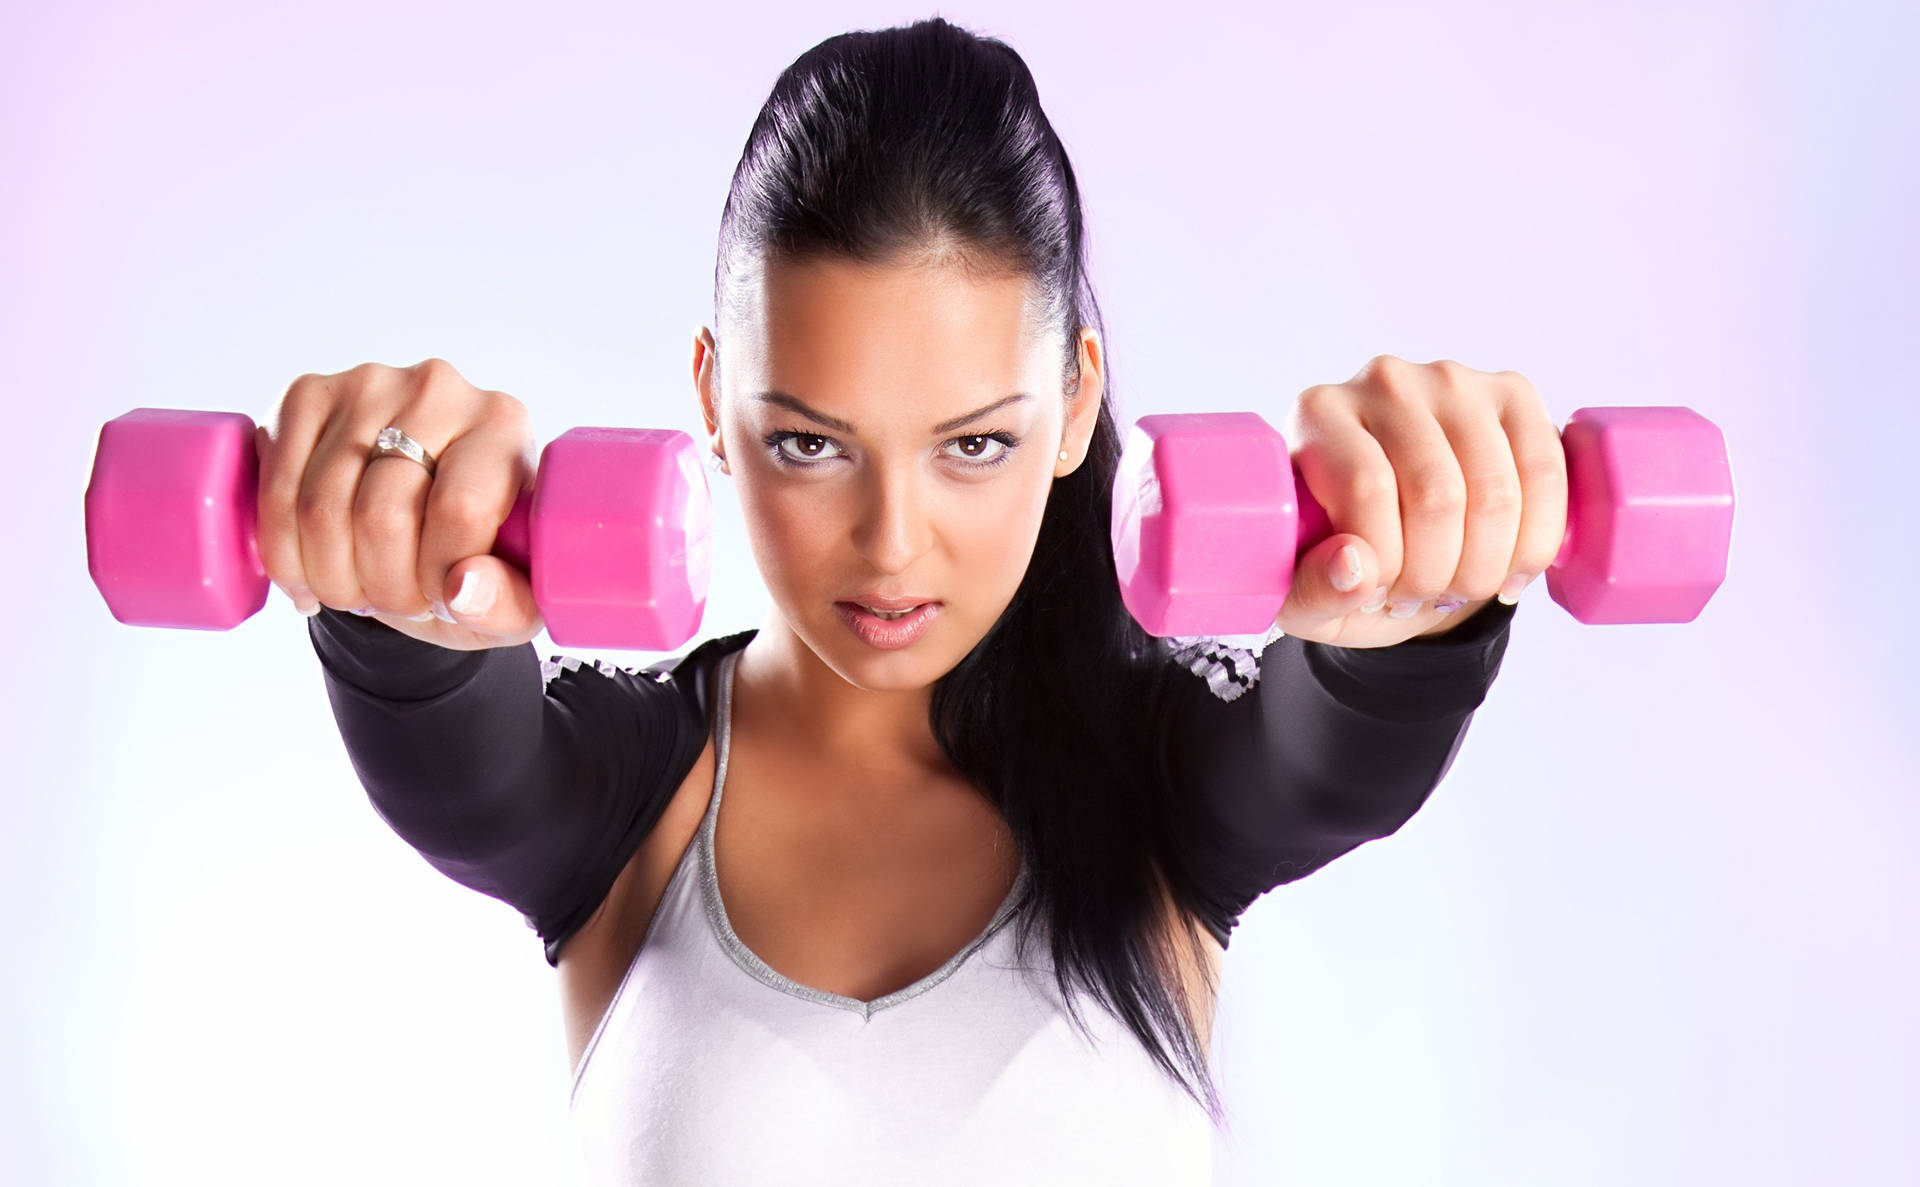 Fit Woman Holding Pink Dumbbells Wallpaper